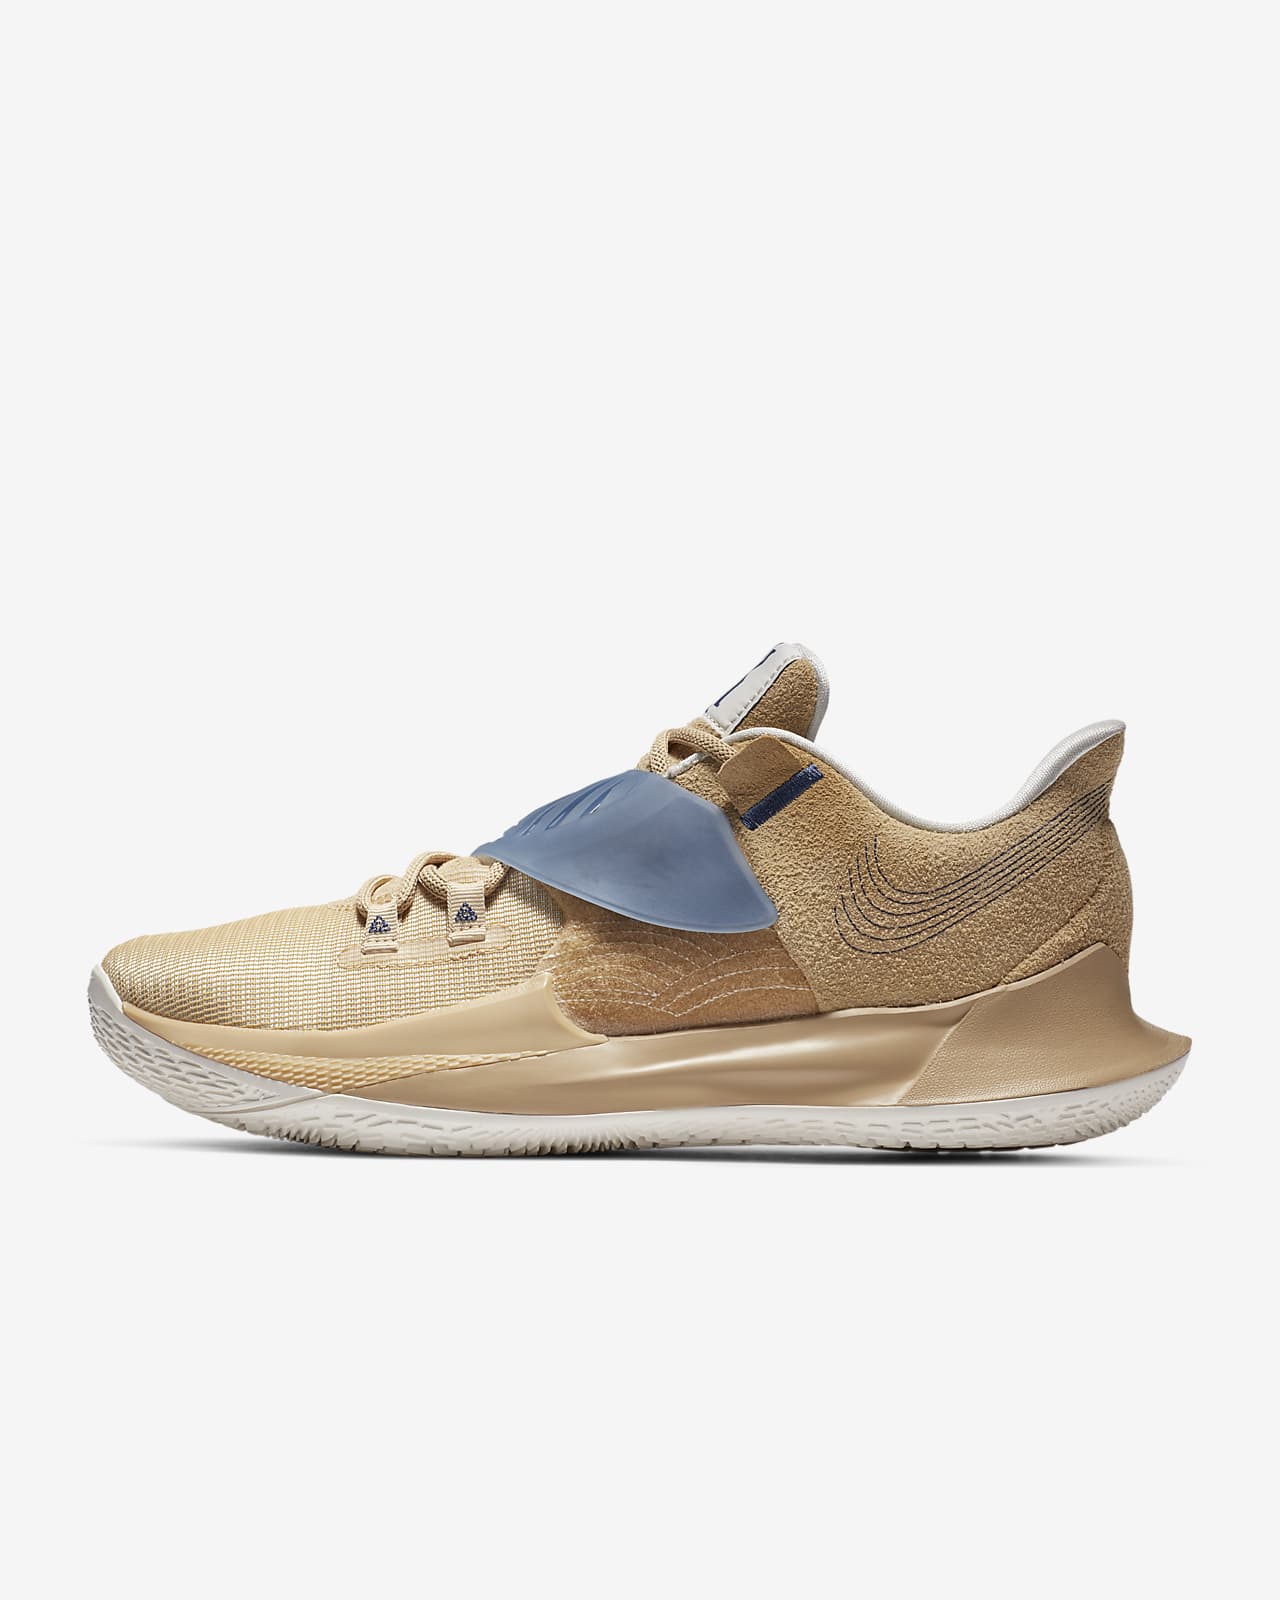 kyrie low id white and gold